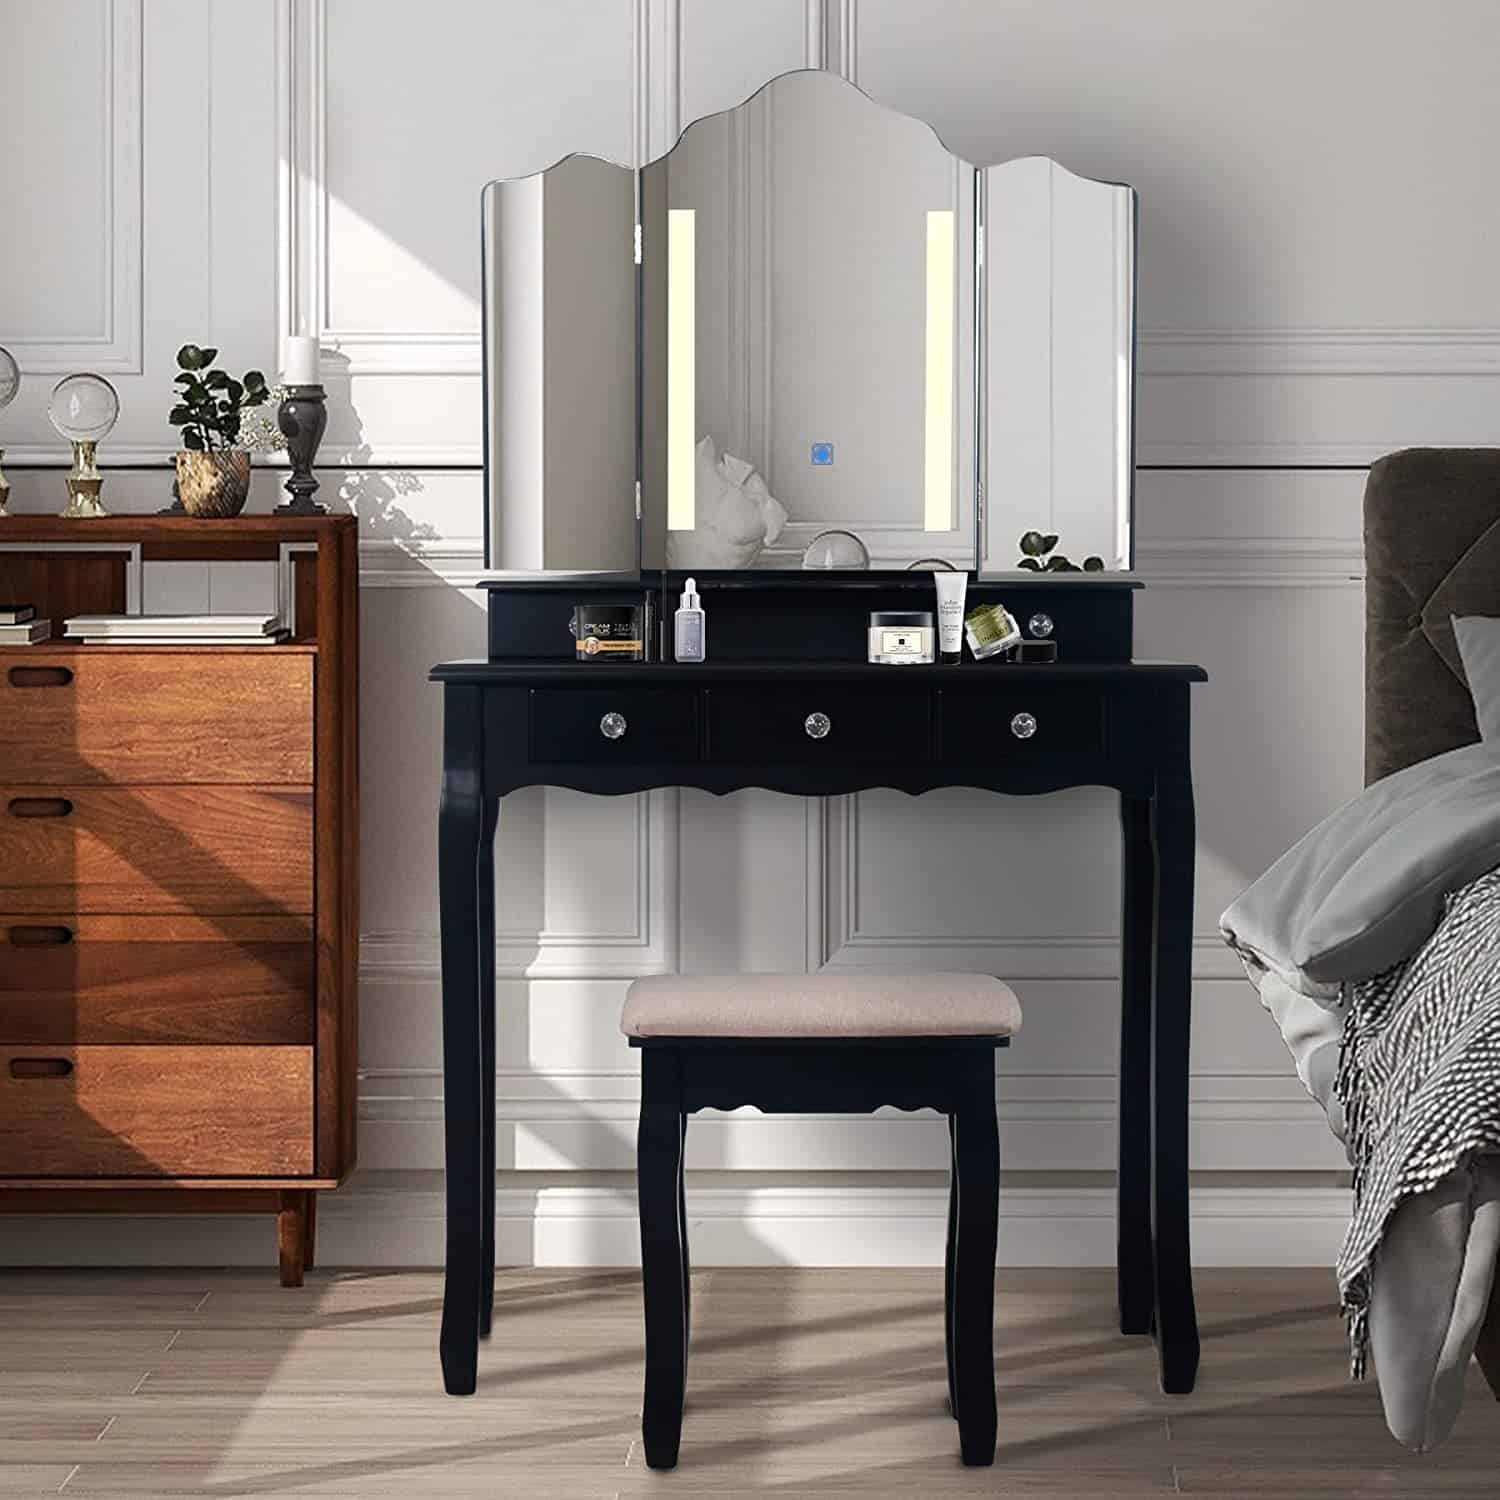 A beautiful, wooden, black-colored dressing table design with 3-fold mirrors, minimum storage space, and a matching stool, in a white room.